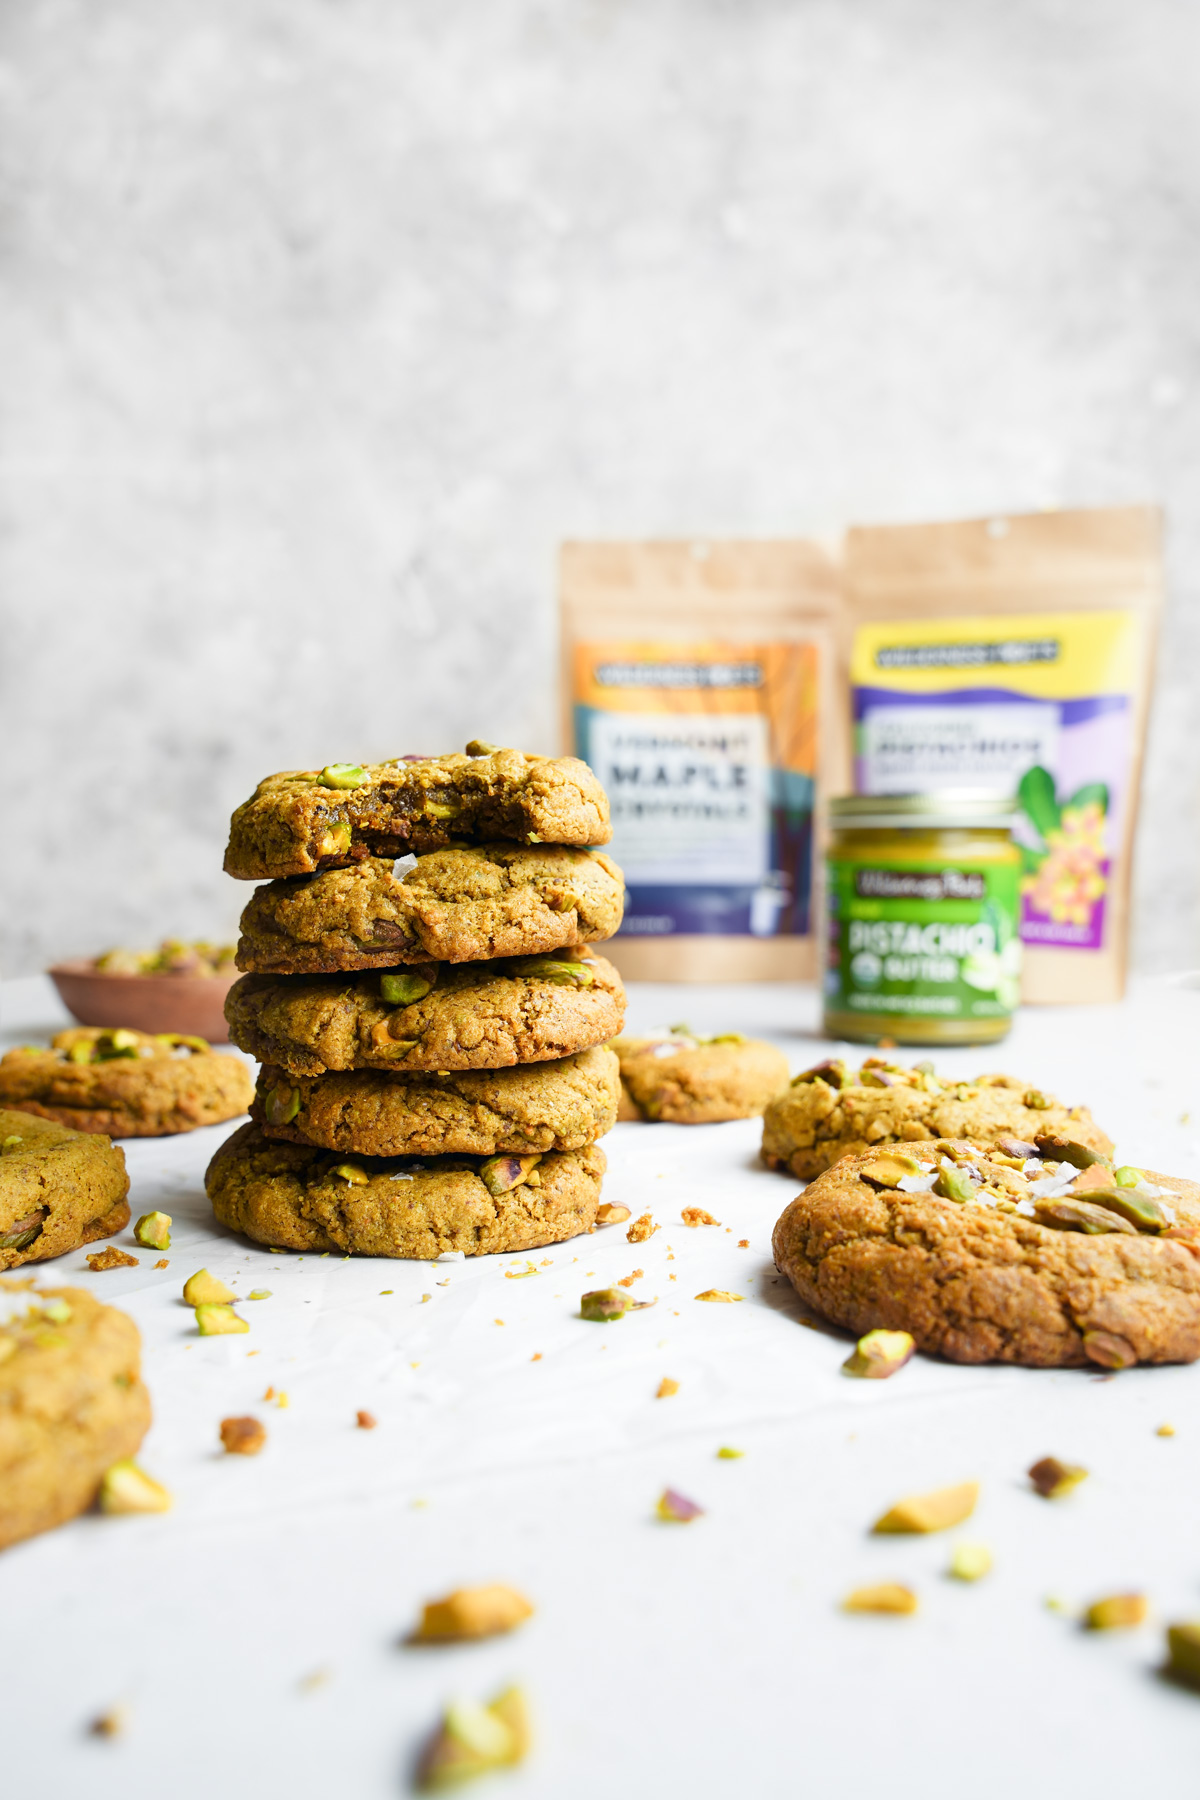 the vegan pistachio cookies stacked on top of each other with the wilderness poets products in the background